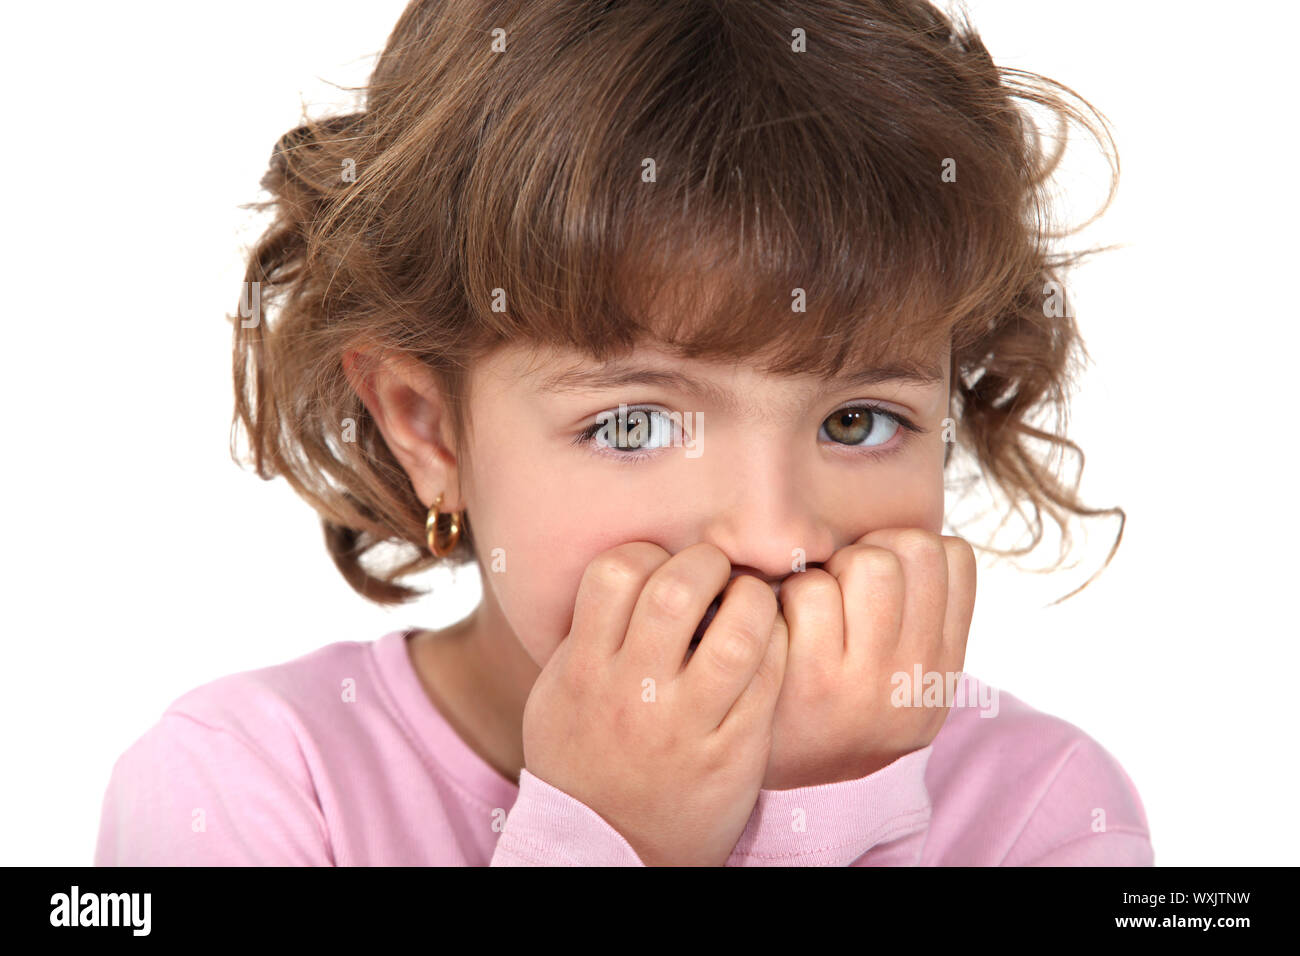 Scared little girl biting nails Stock Photo - Alamy